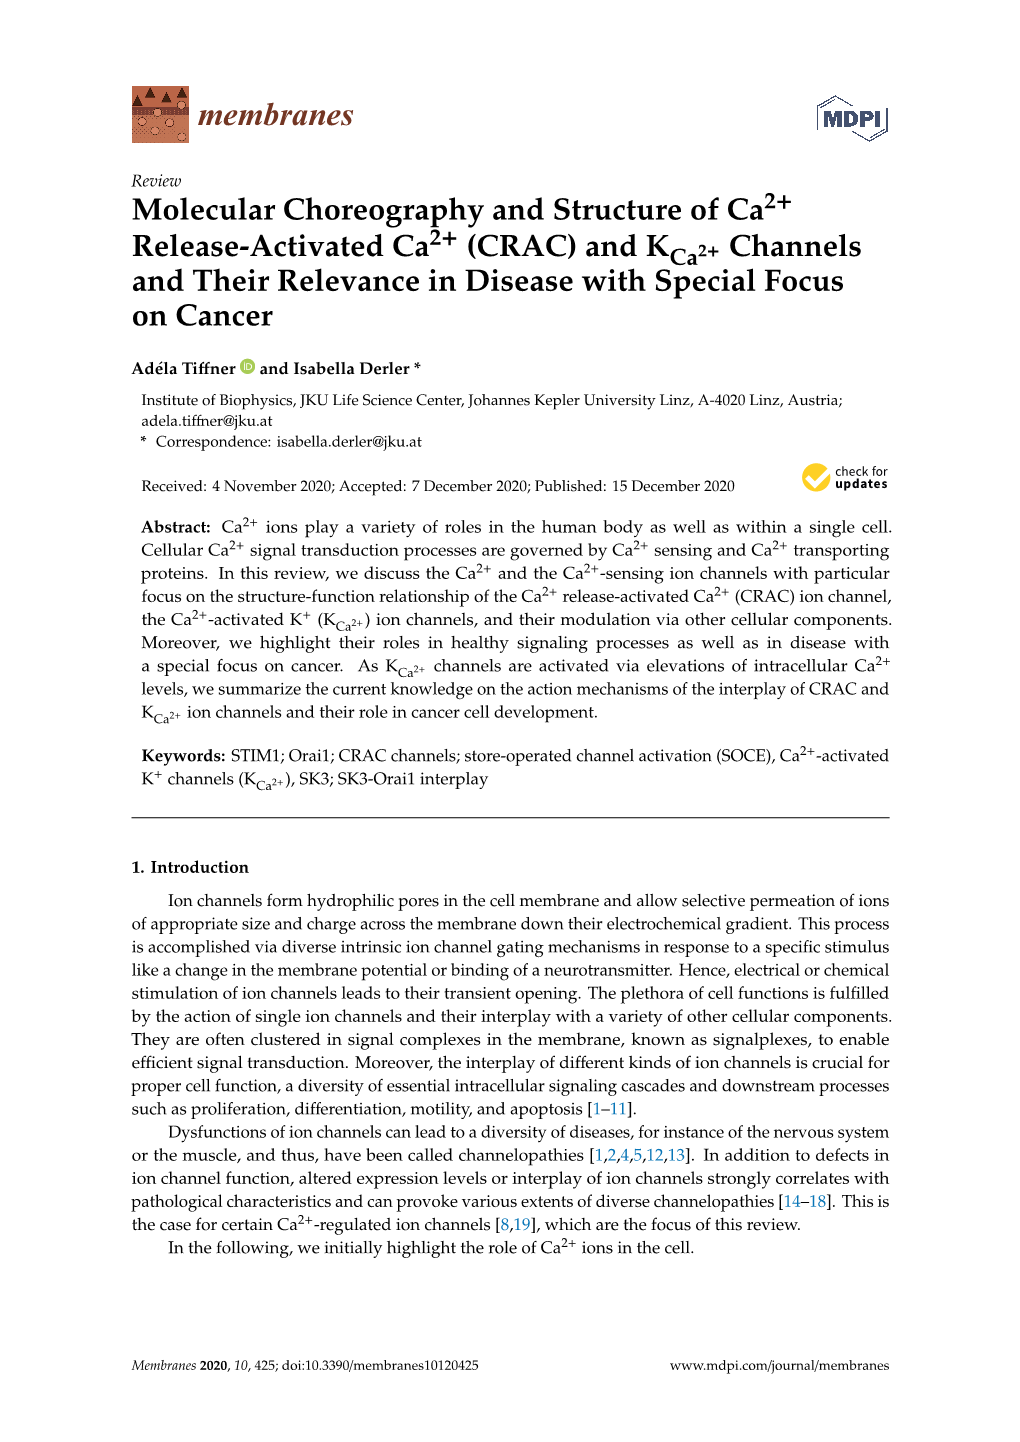 CRAC) and Kca2+ Channels and Their Relevance in Disease with Special Focus on Cancer